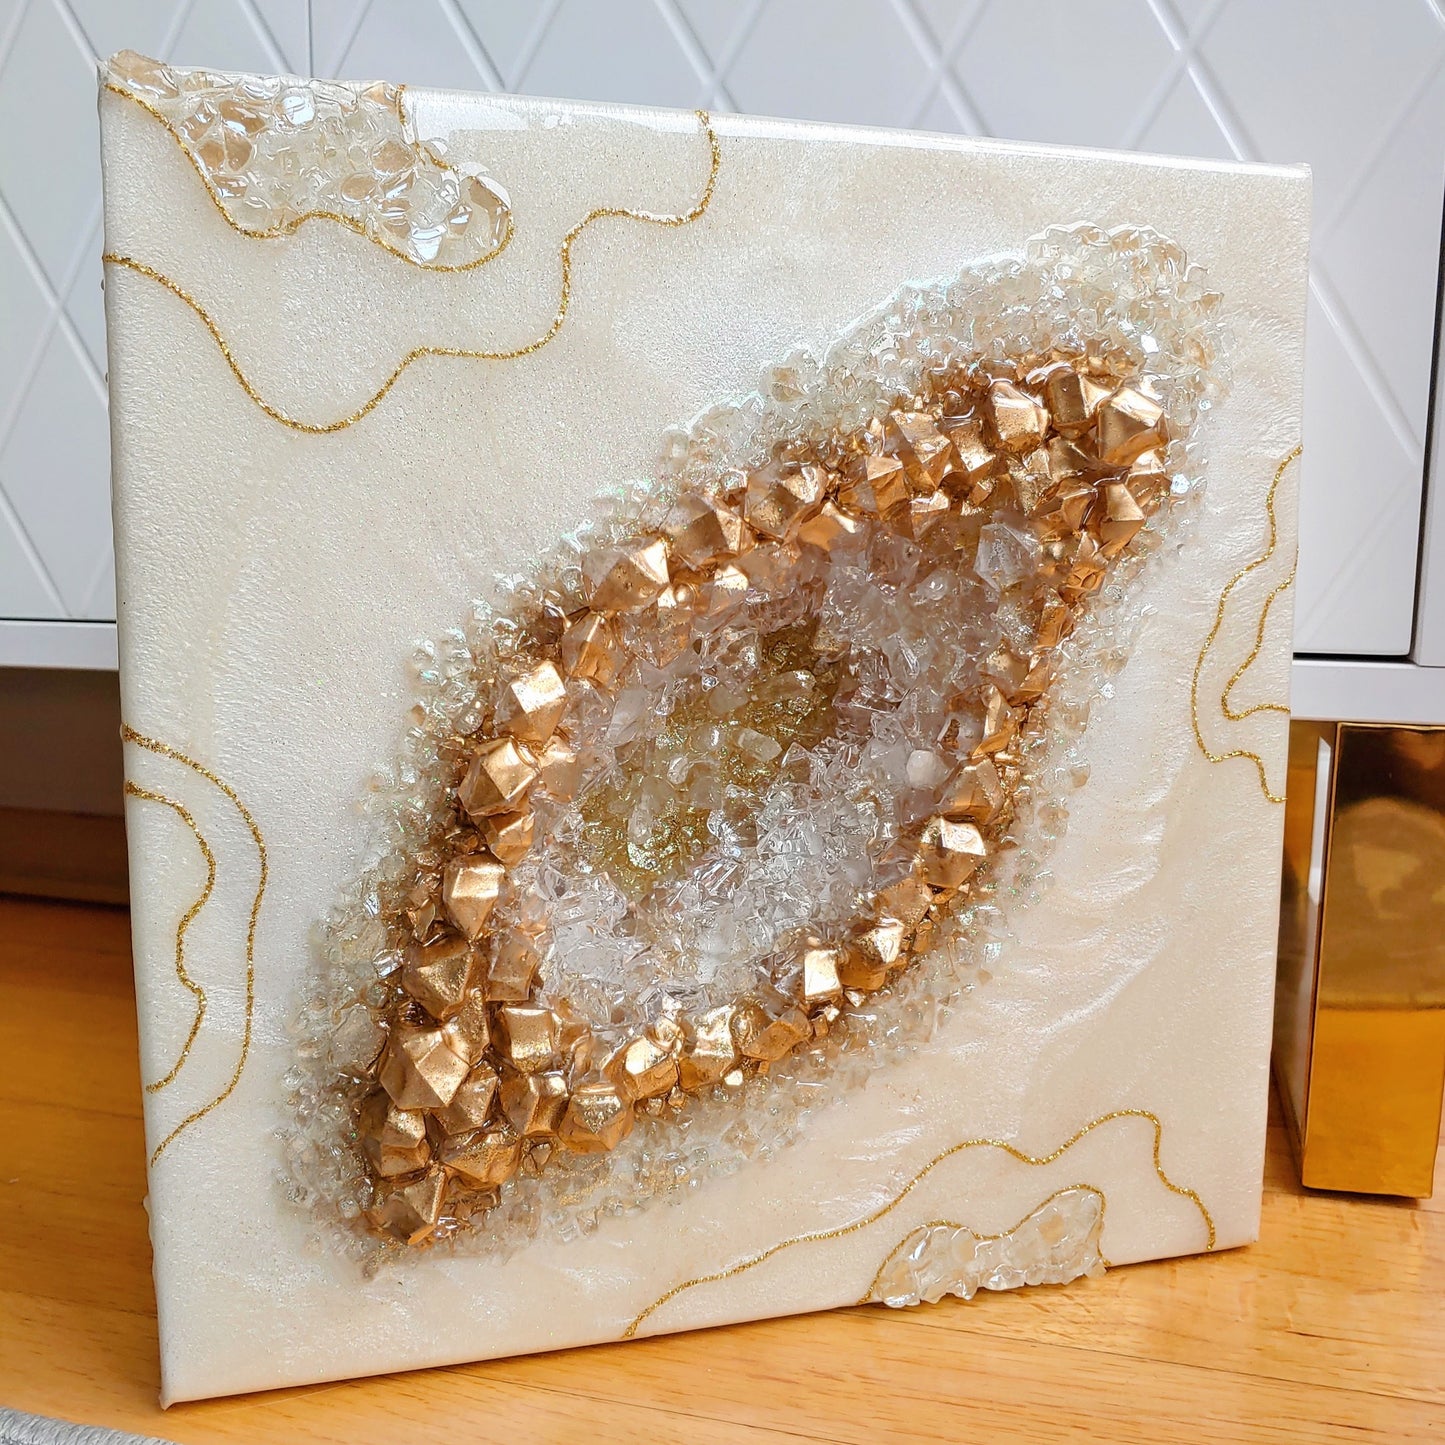 Stunning 3 dimensional artwork in gold! 12x12